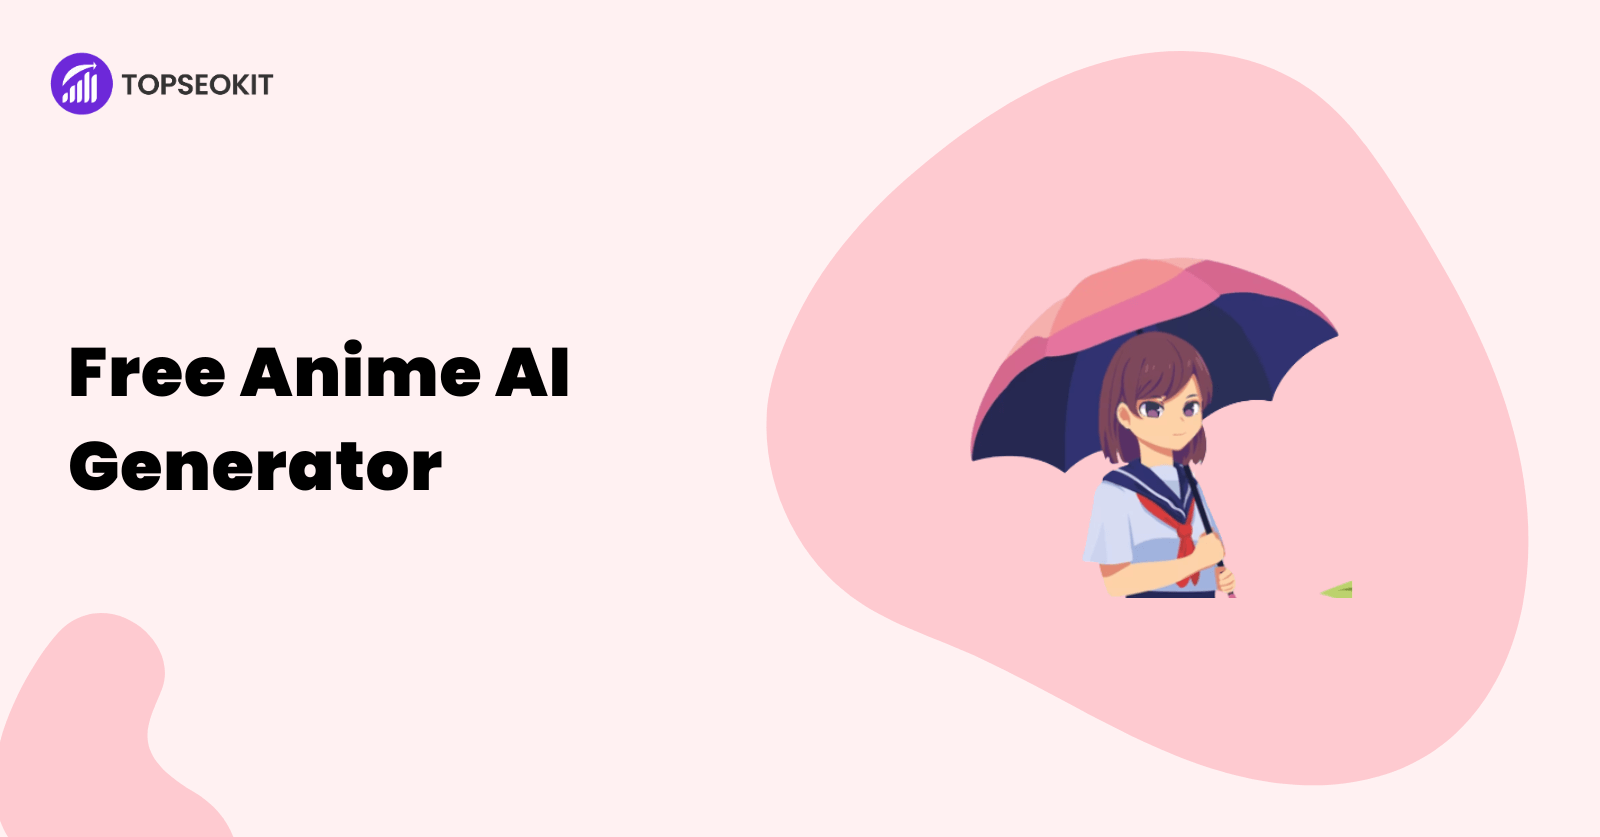 Anime AI Generators Bring Your Anime Dreams to Life – Discover the Web’s Hottest Free